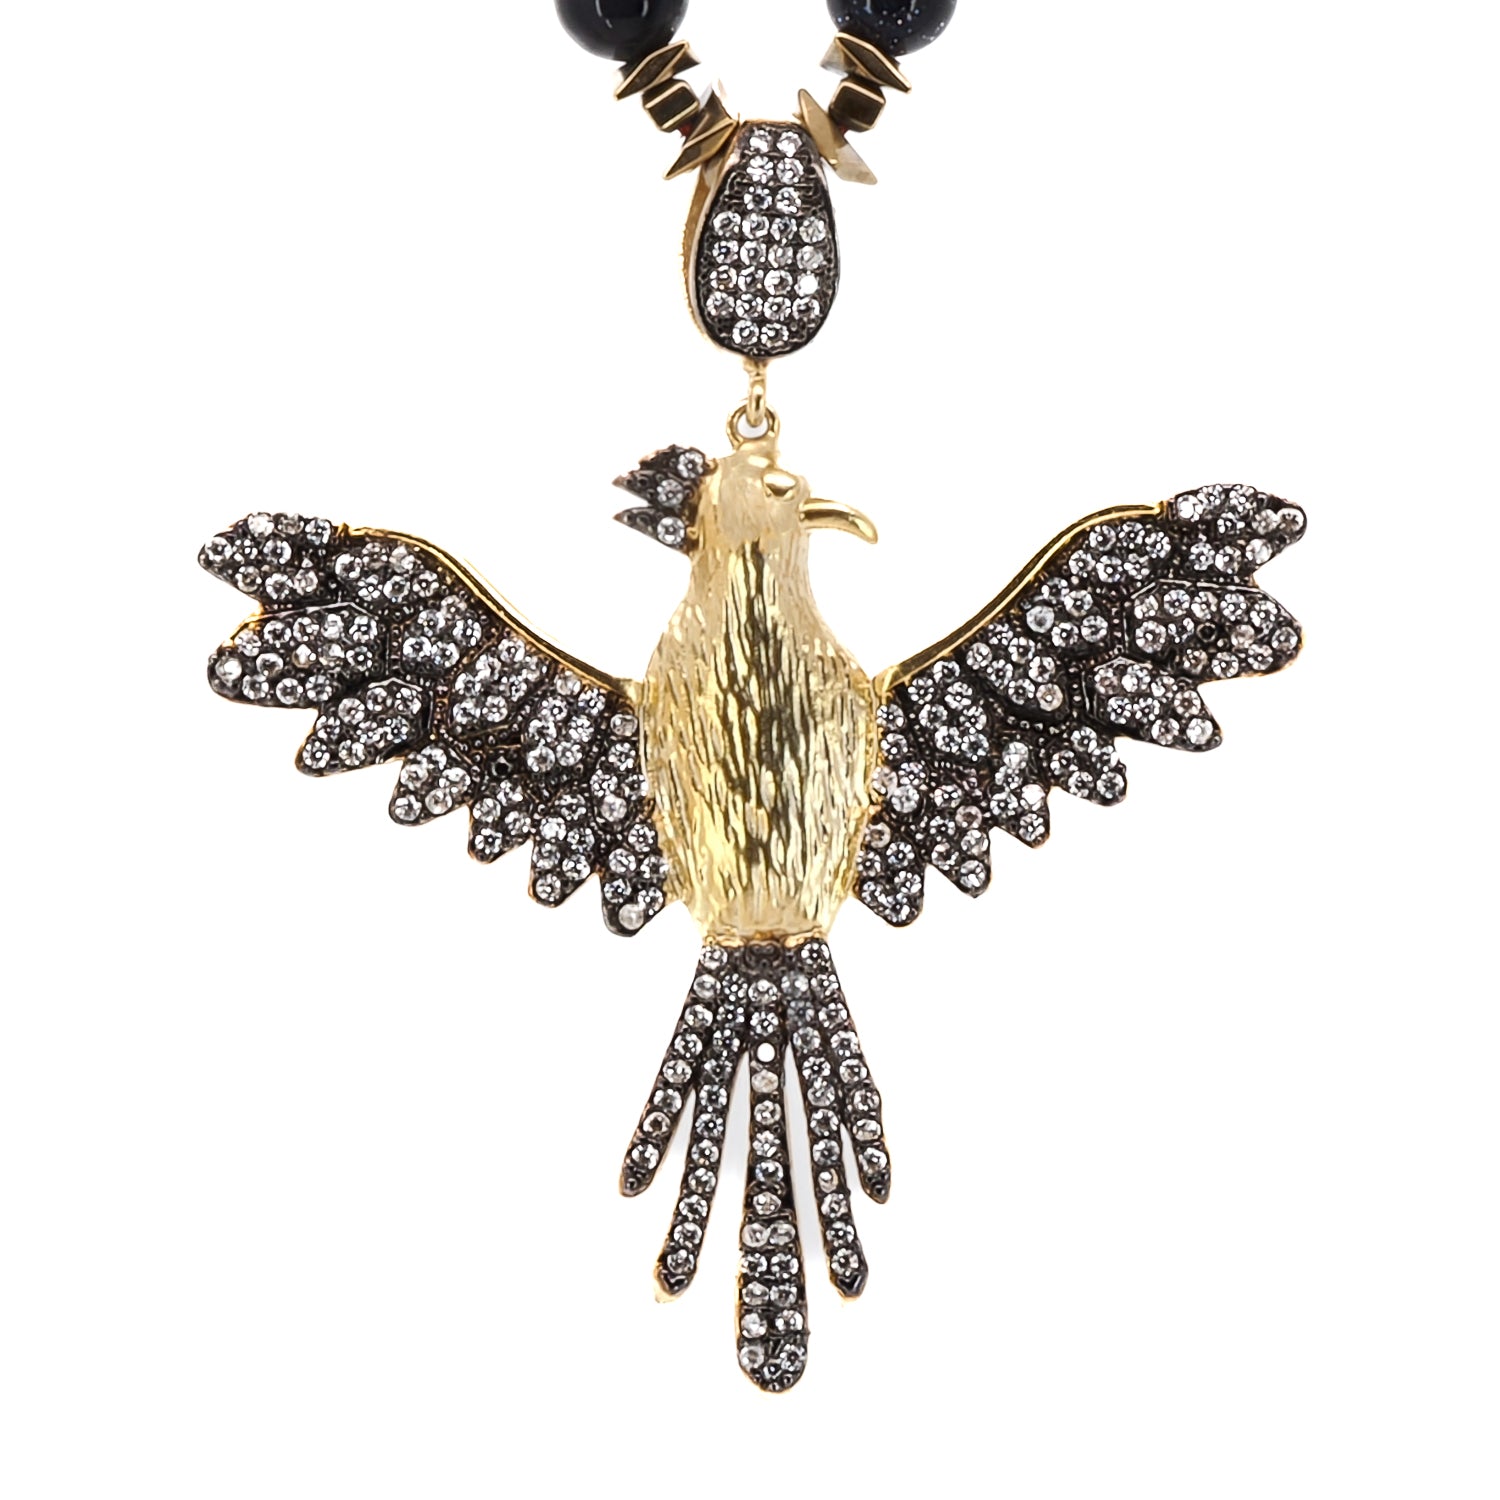 Make a bold statement with the Magical Phoenix Bird Necklace, showcasing the beauty of star stone beads and a mesmerizing phoenix pendant.